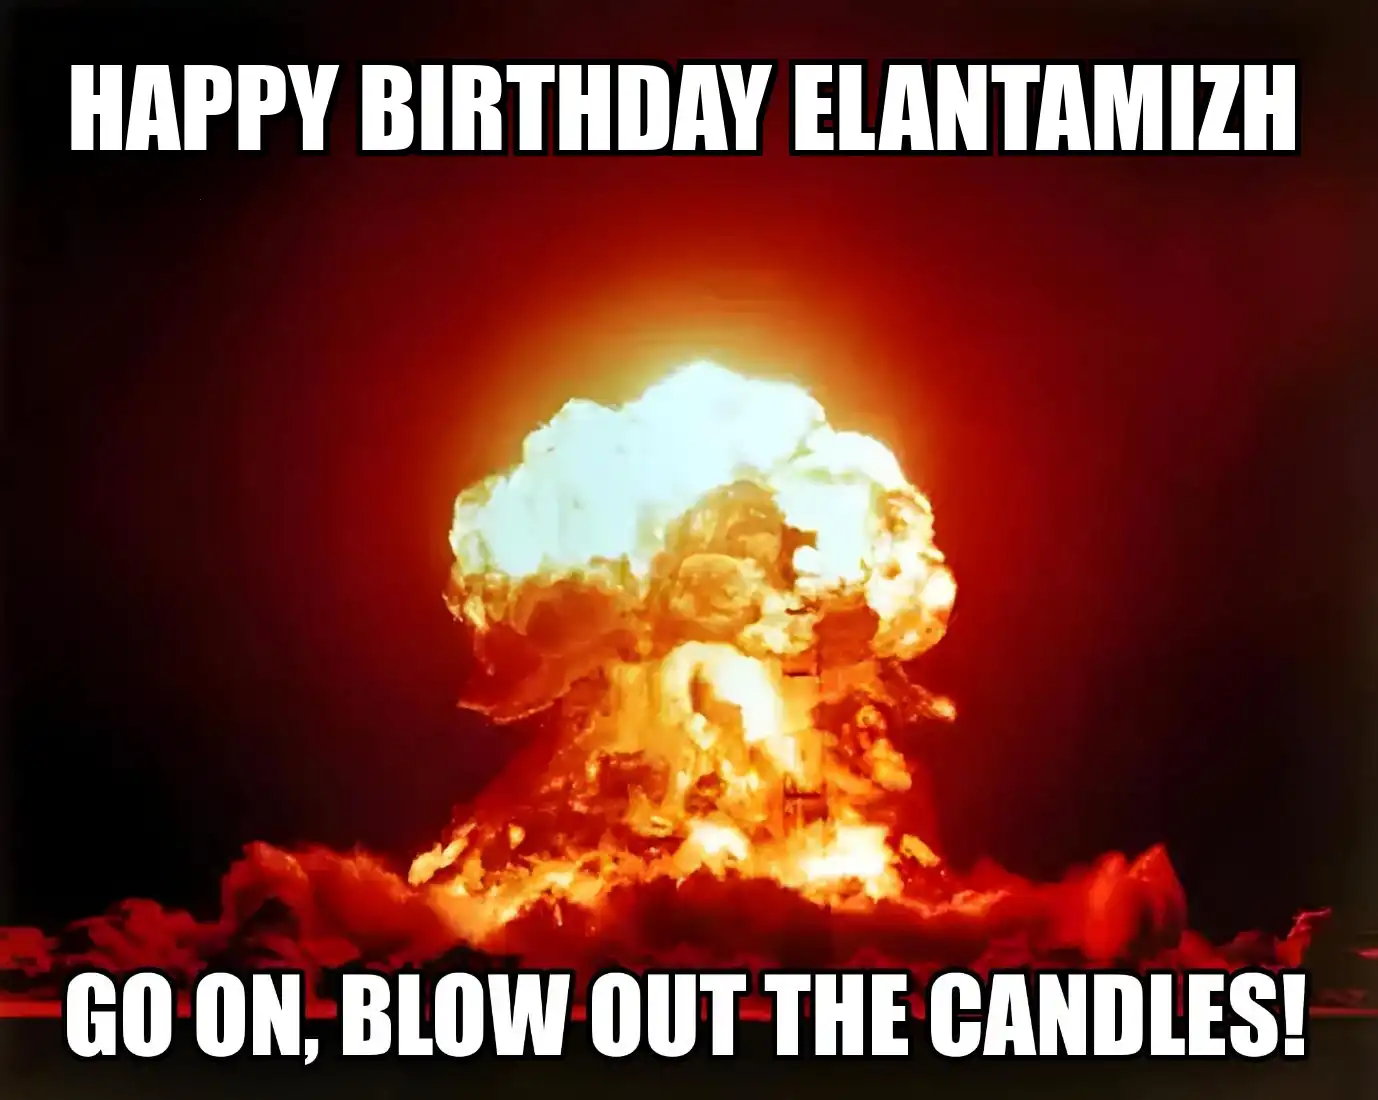 Happy Birthday Elantamizh Go On Blow Out The Candles Meme